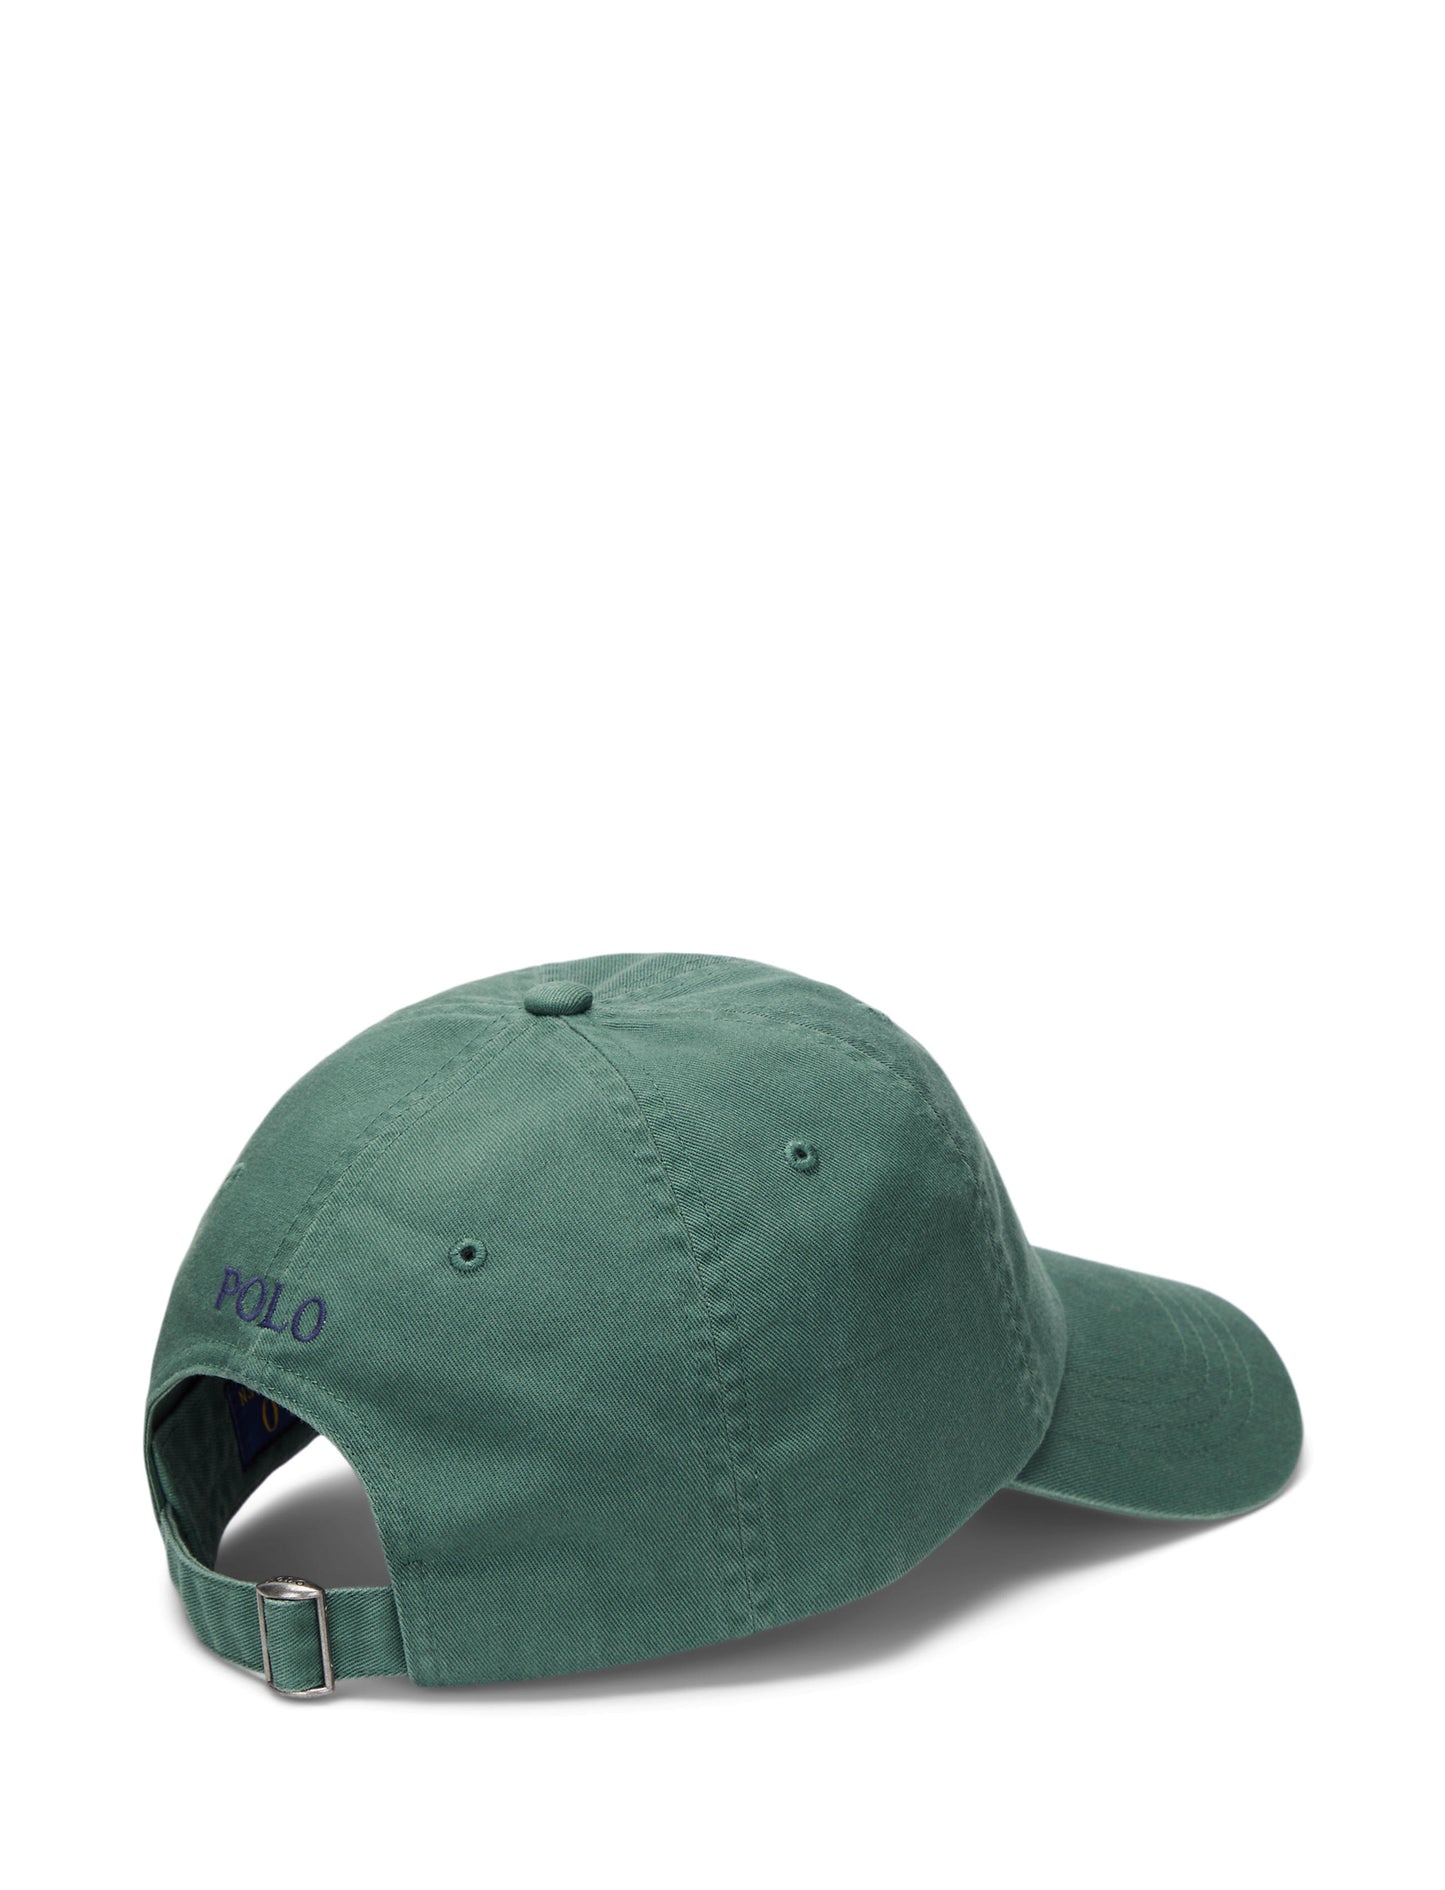 Polo Ralph Lauren Sport Cap Washed Forest OSF